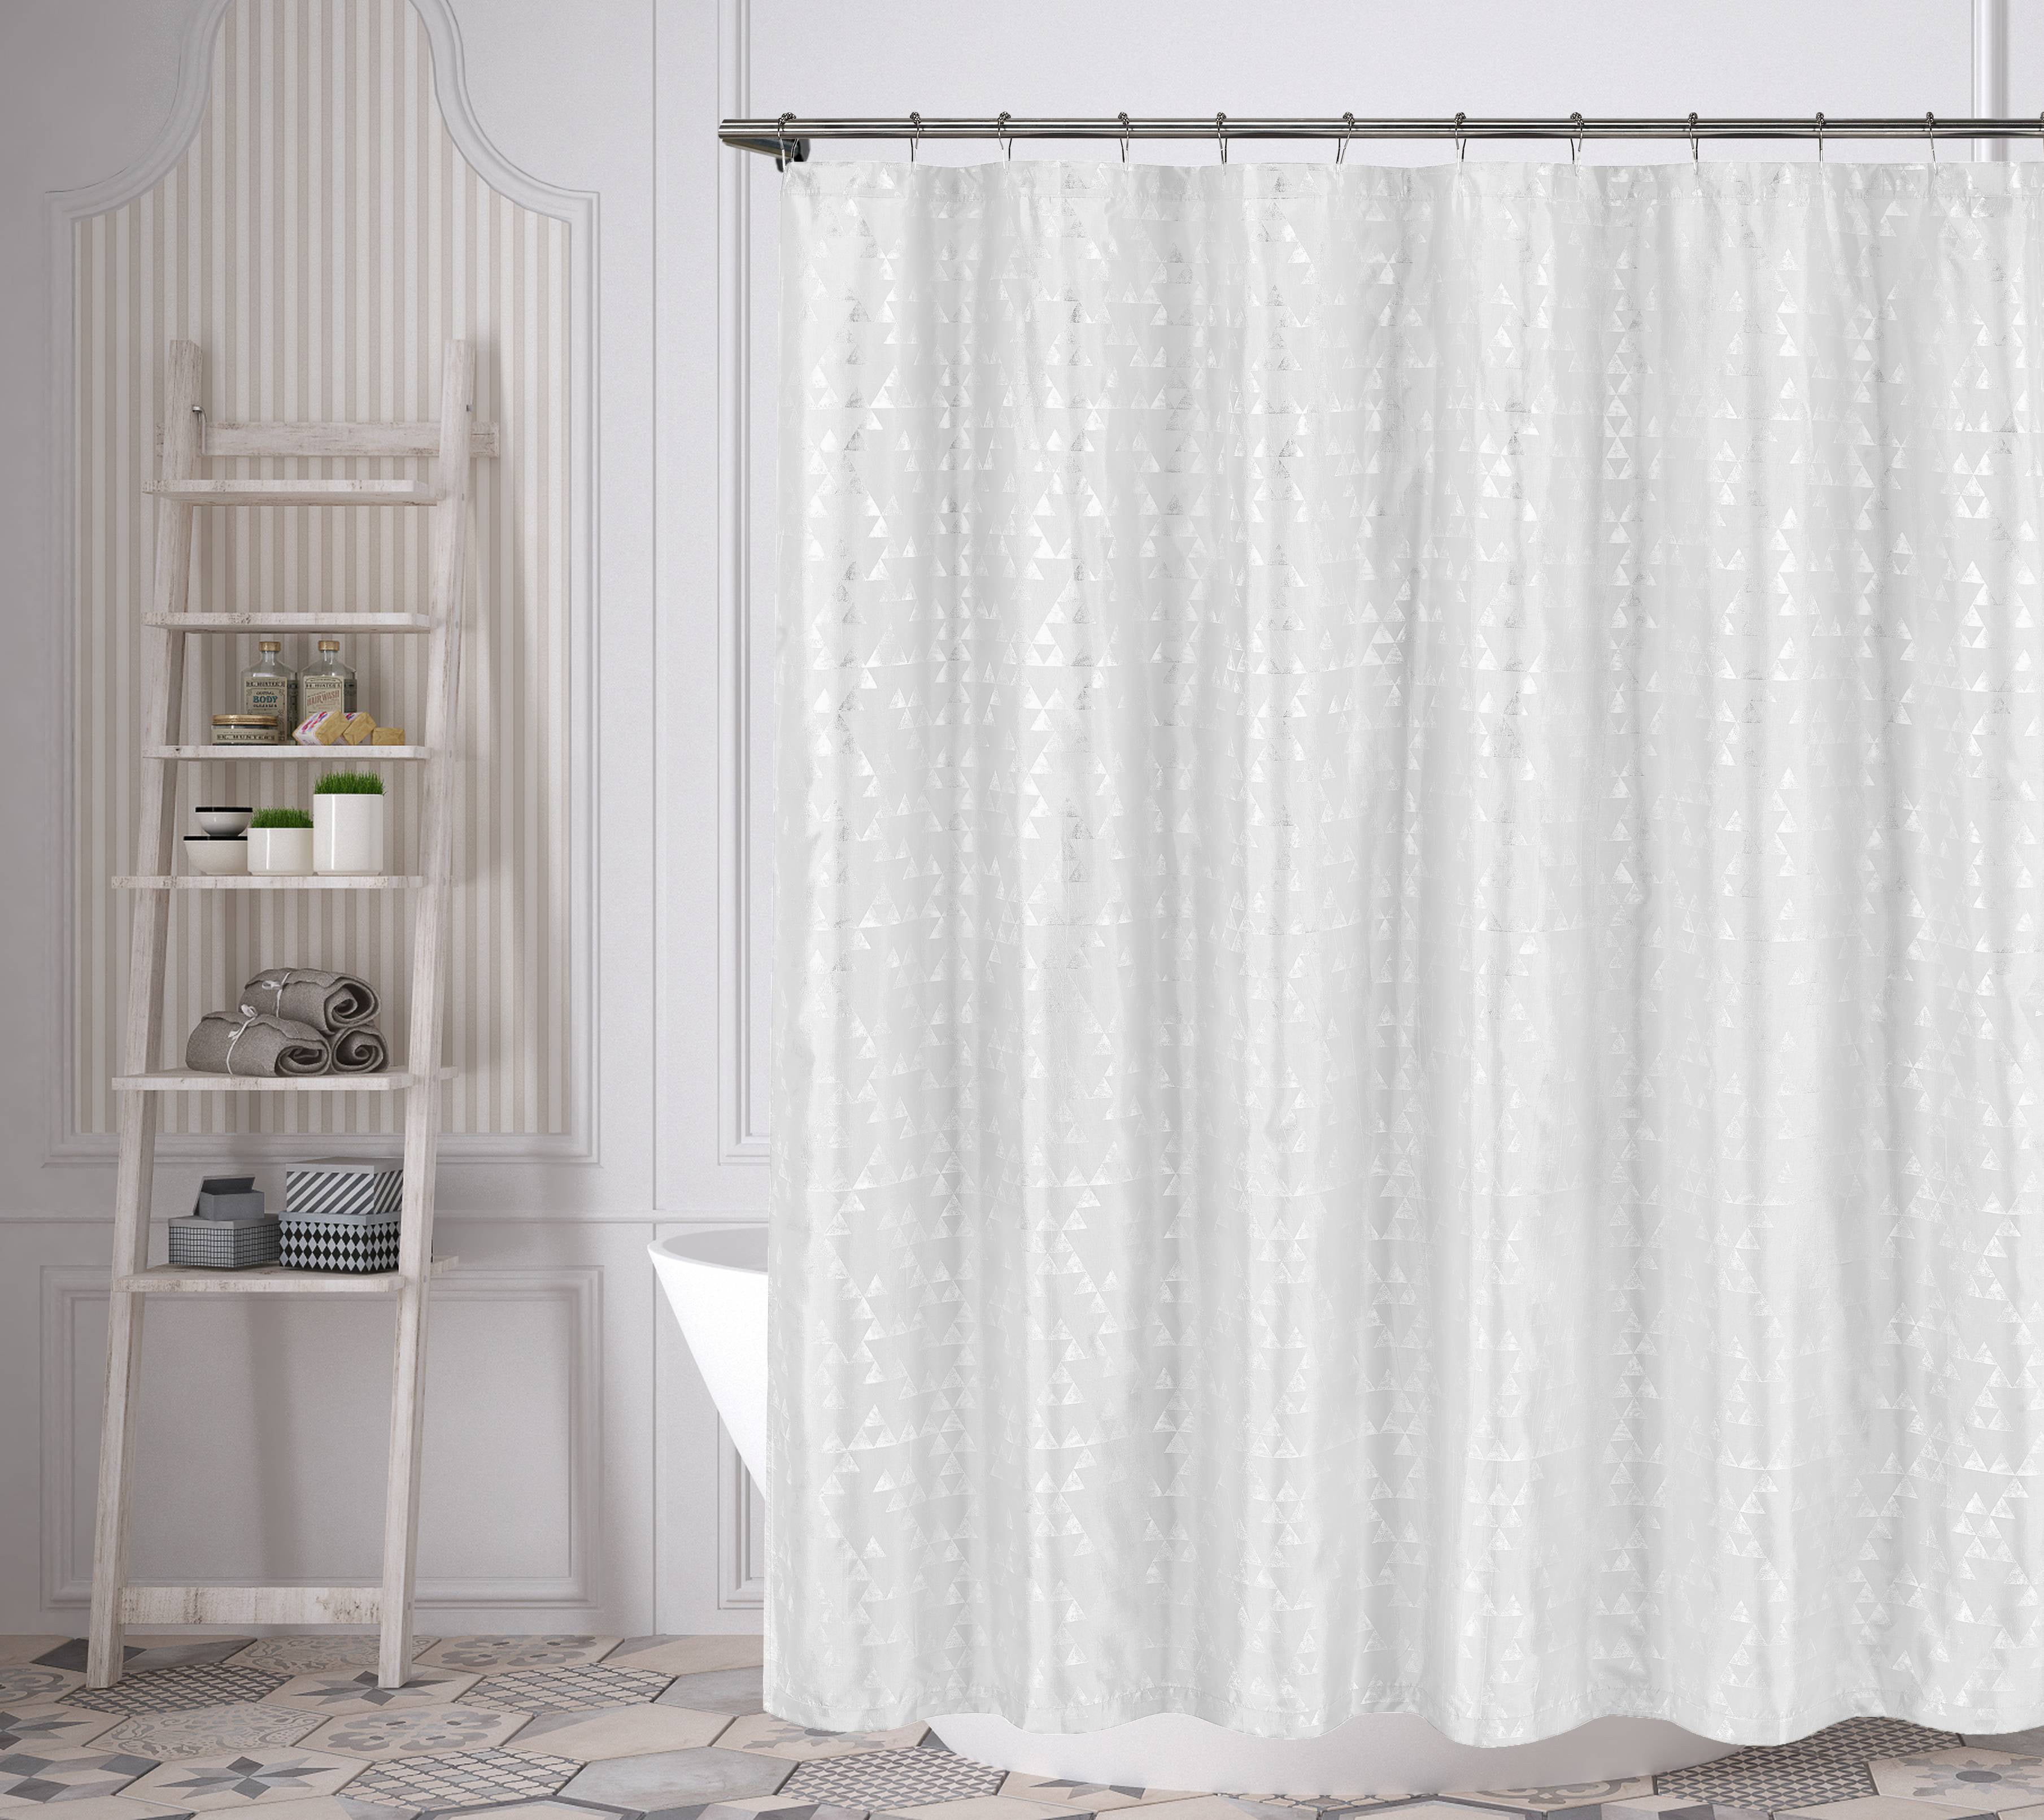 kensie Susie Shower Silver Colored Spa Bath Curtain-Machine Washable-Water Repellent Treatment Decorative Modern Bathroom Collection-72x72’’ 72x72